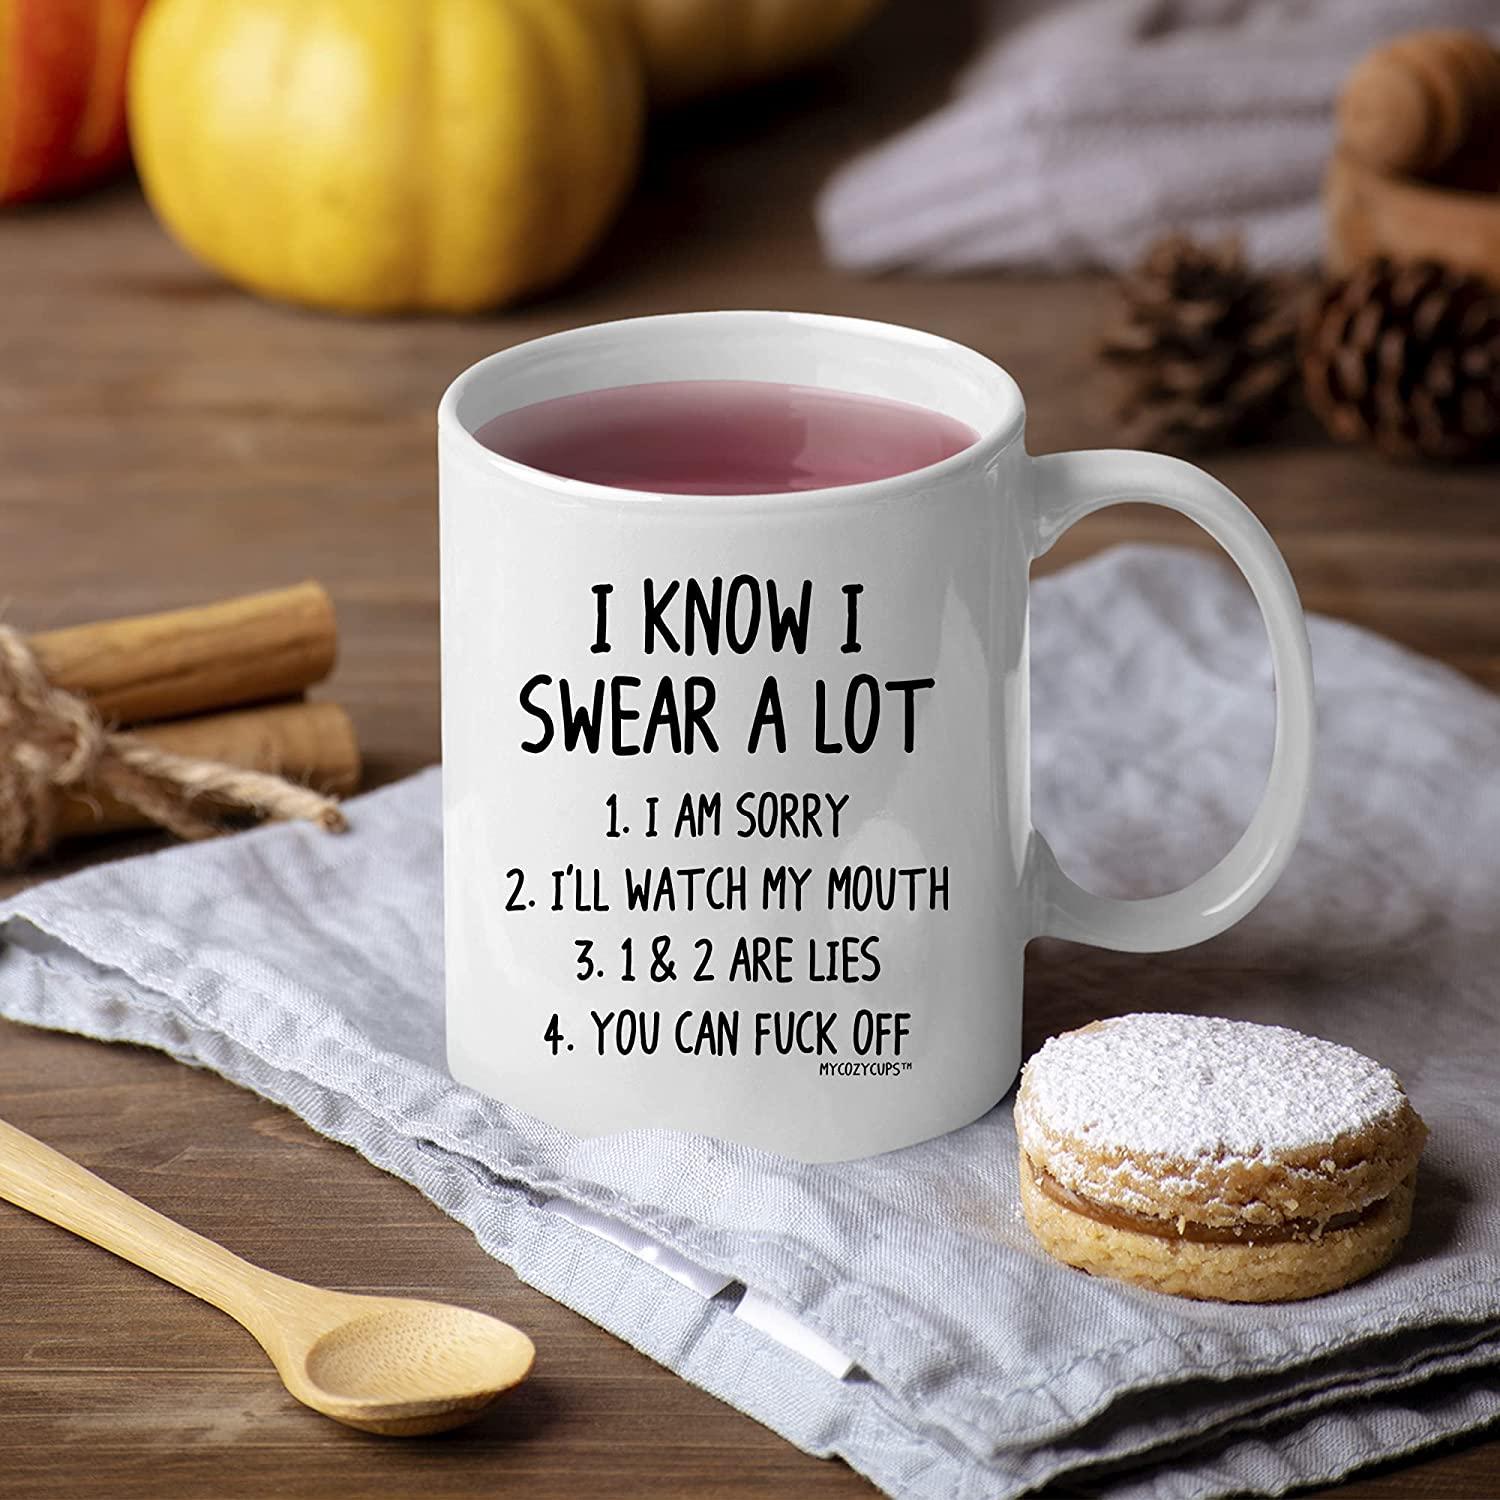 I Know I Swear A Lot Mug - 11oz Coffee Cup for Best Friend, Sister - Birthday, Christmas, Sarcastic Quote Saying Mug for Him or Her - Decotree.co Online Shop